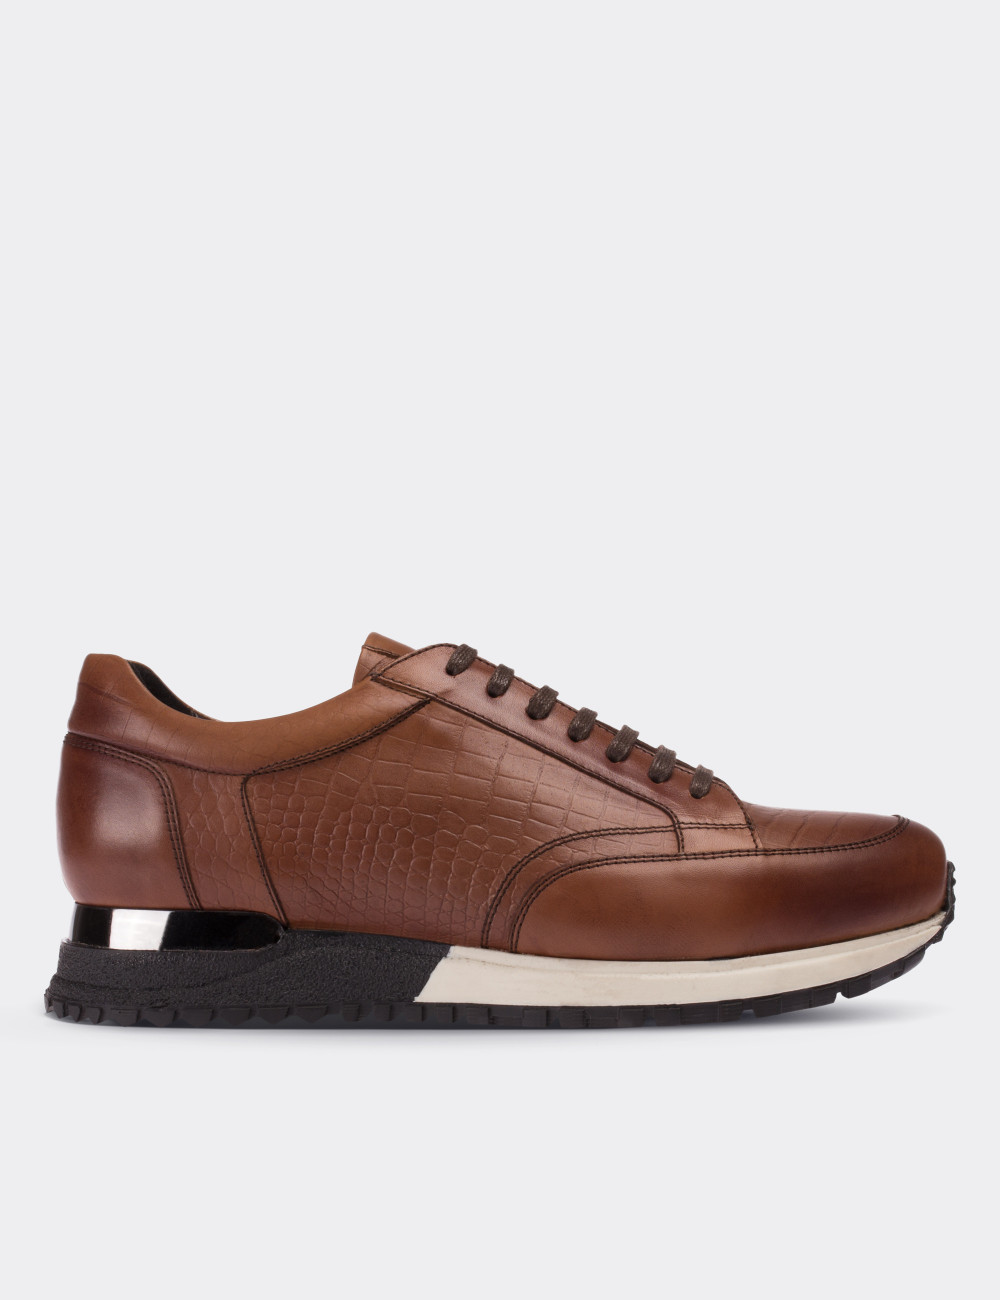 Tan Calfskin Leather Lace-up Shoes - Deery